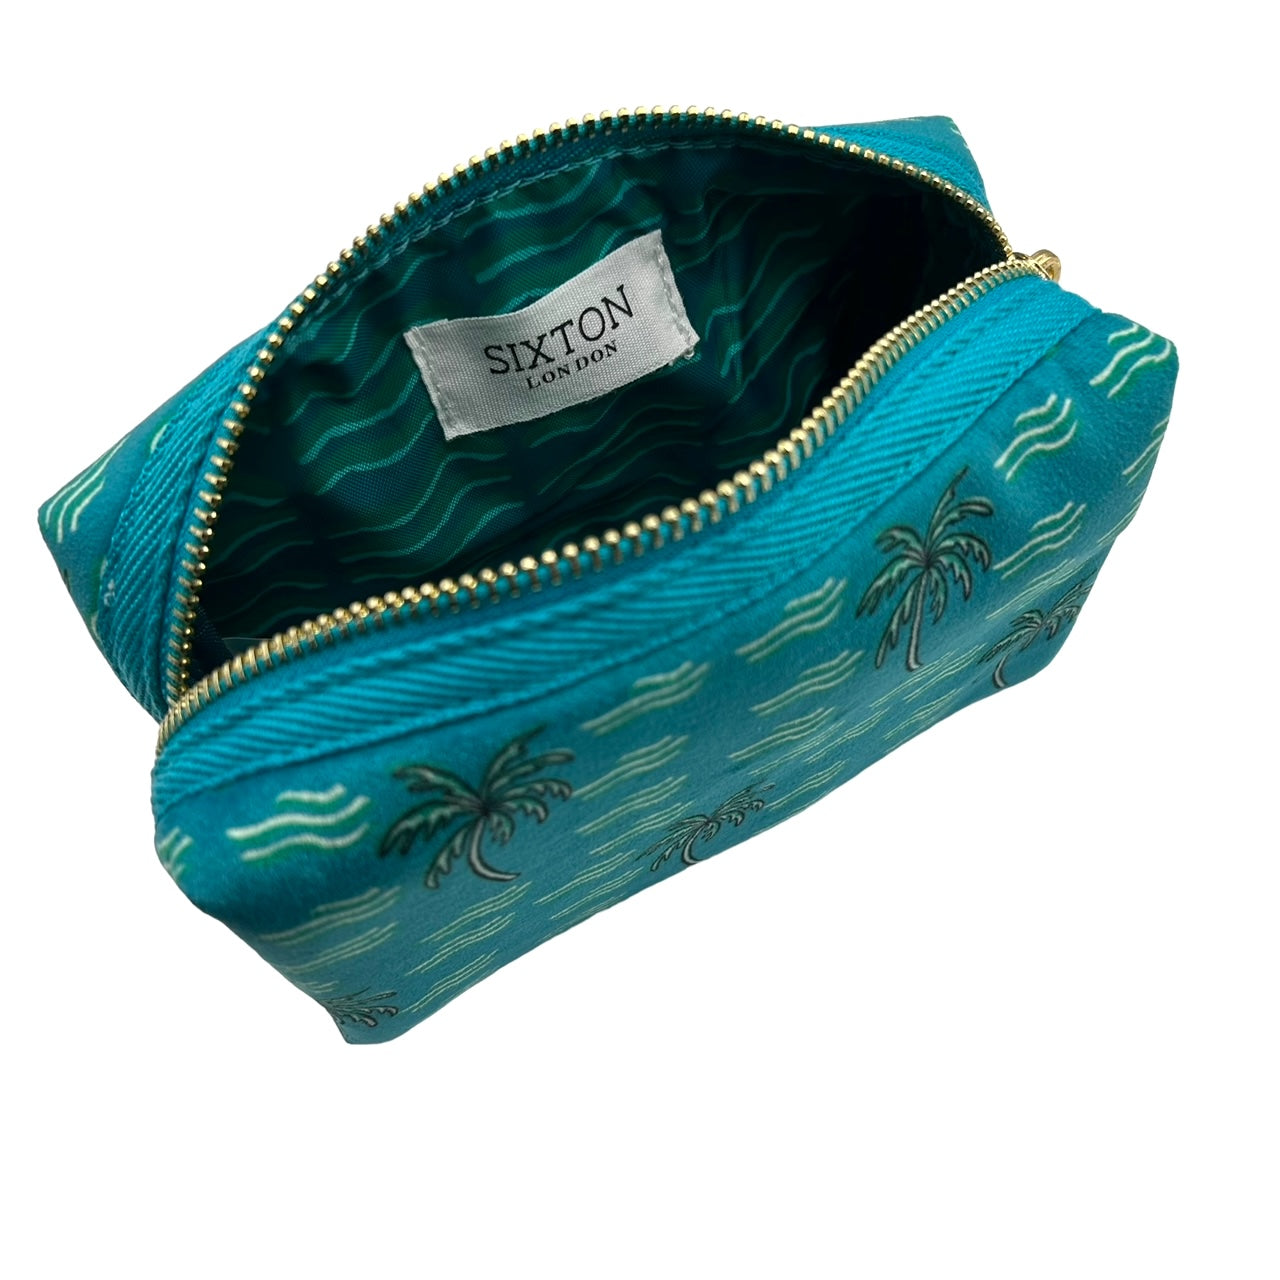 Teal palm large make-up bag & a starfish brooch - recycled velvet, large and small